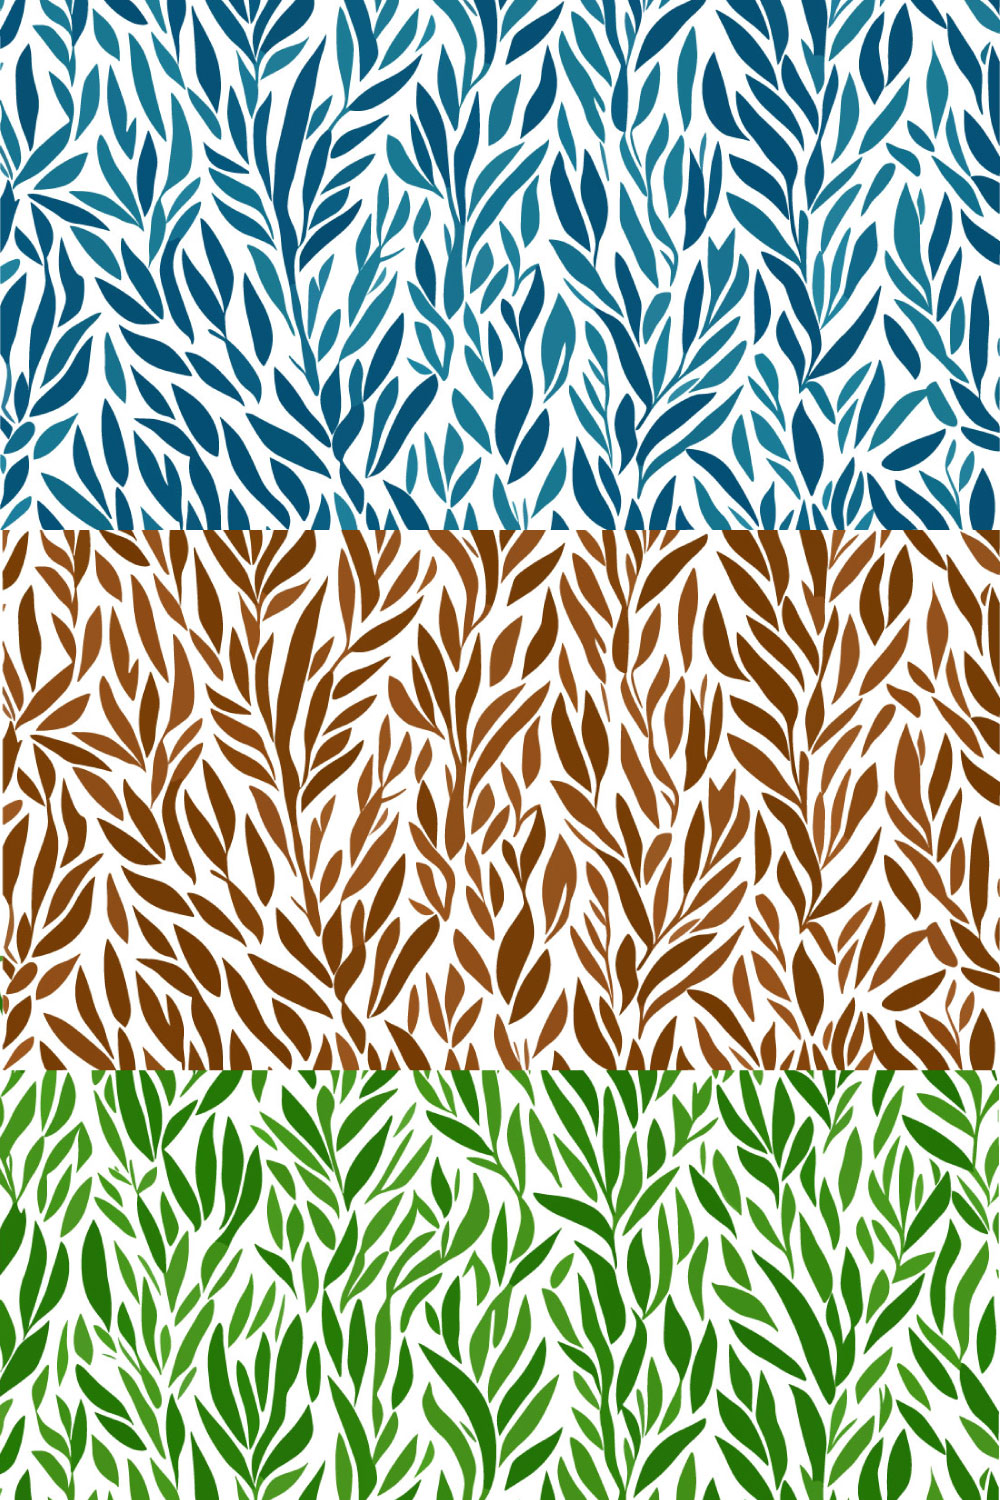 Seamless patterns with leaves on white background Vector illustration pinterest preview image.